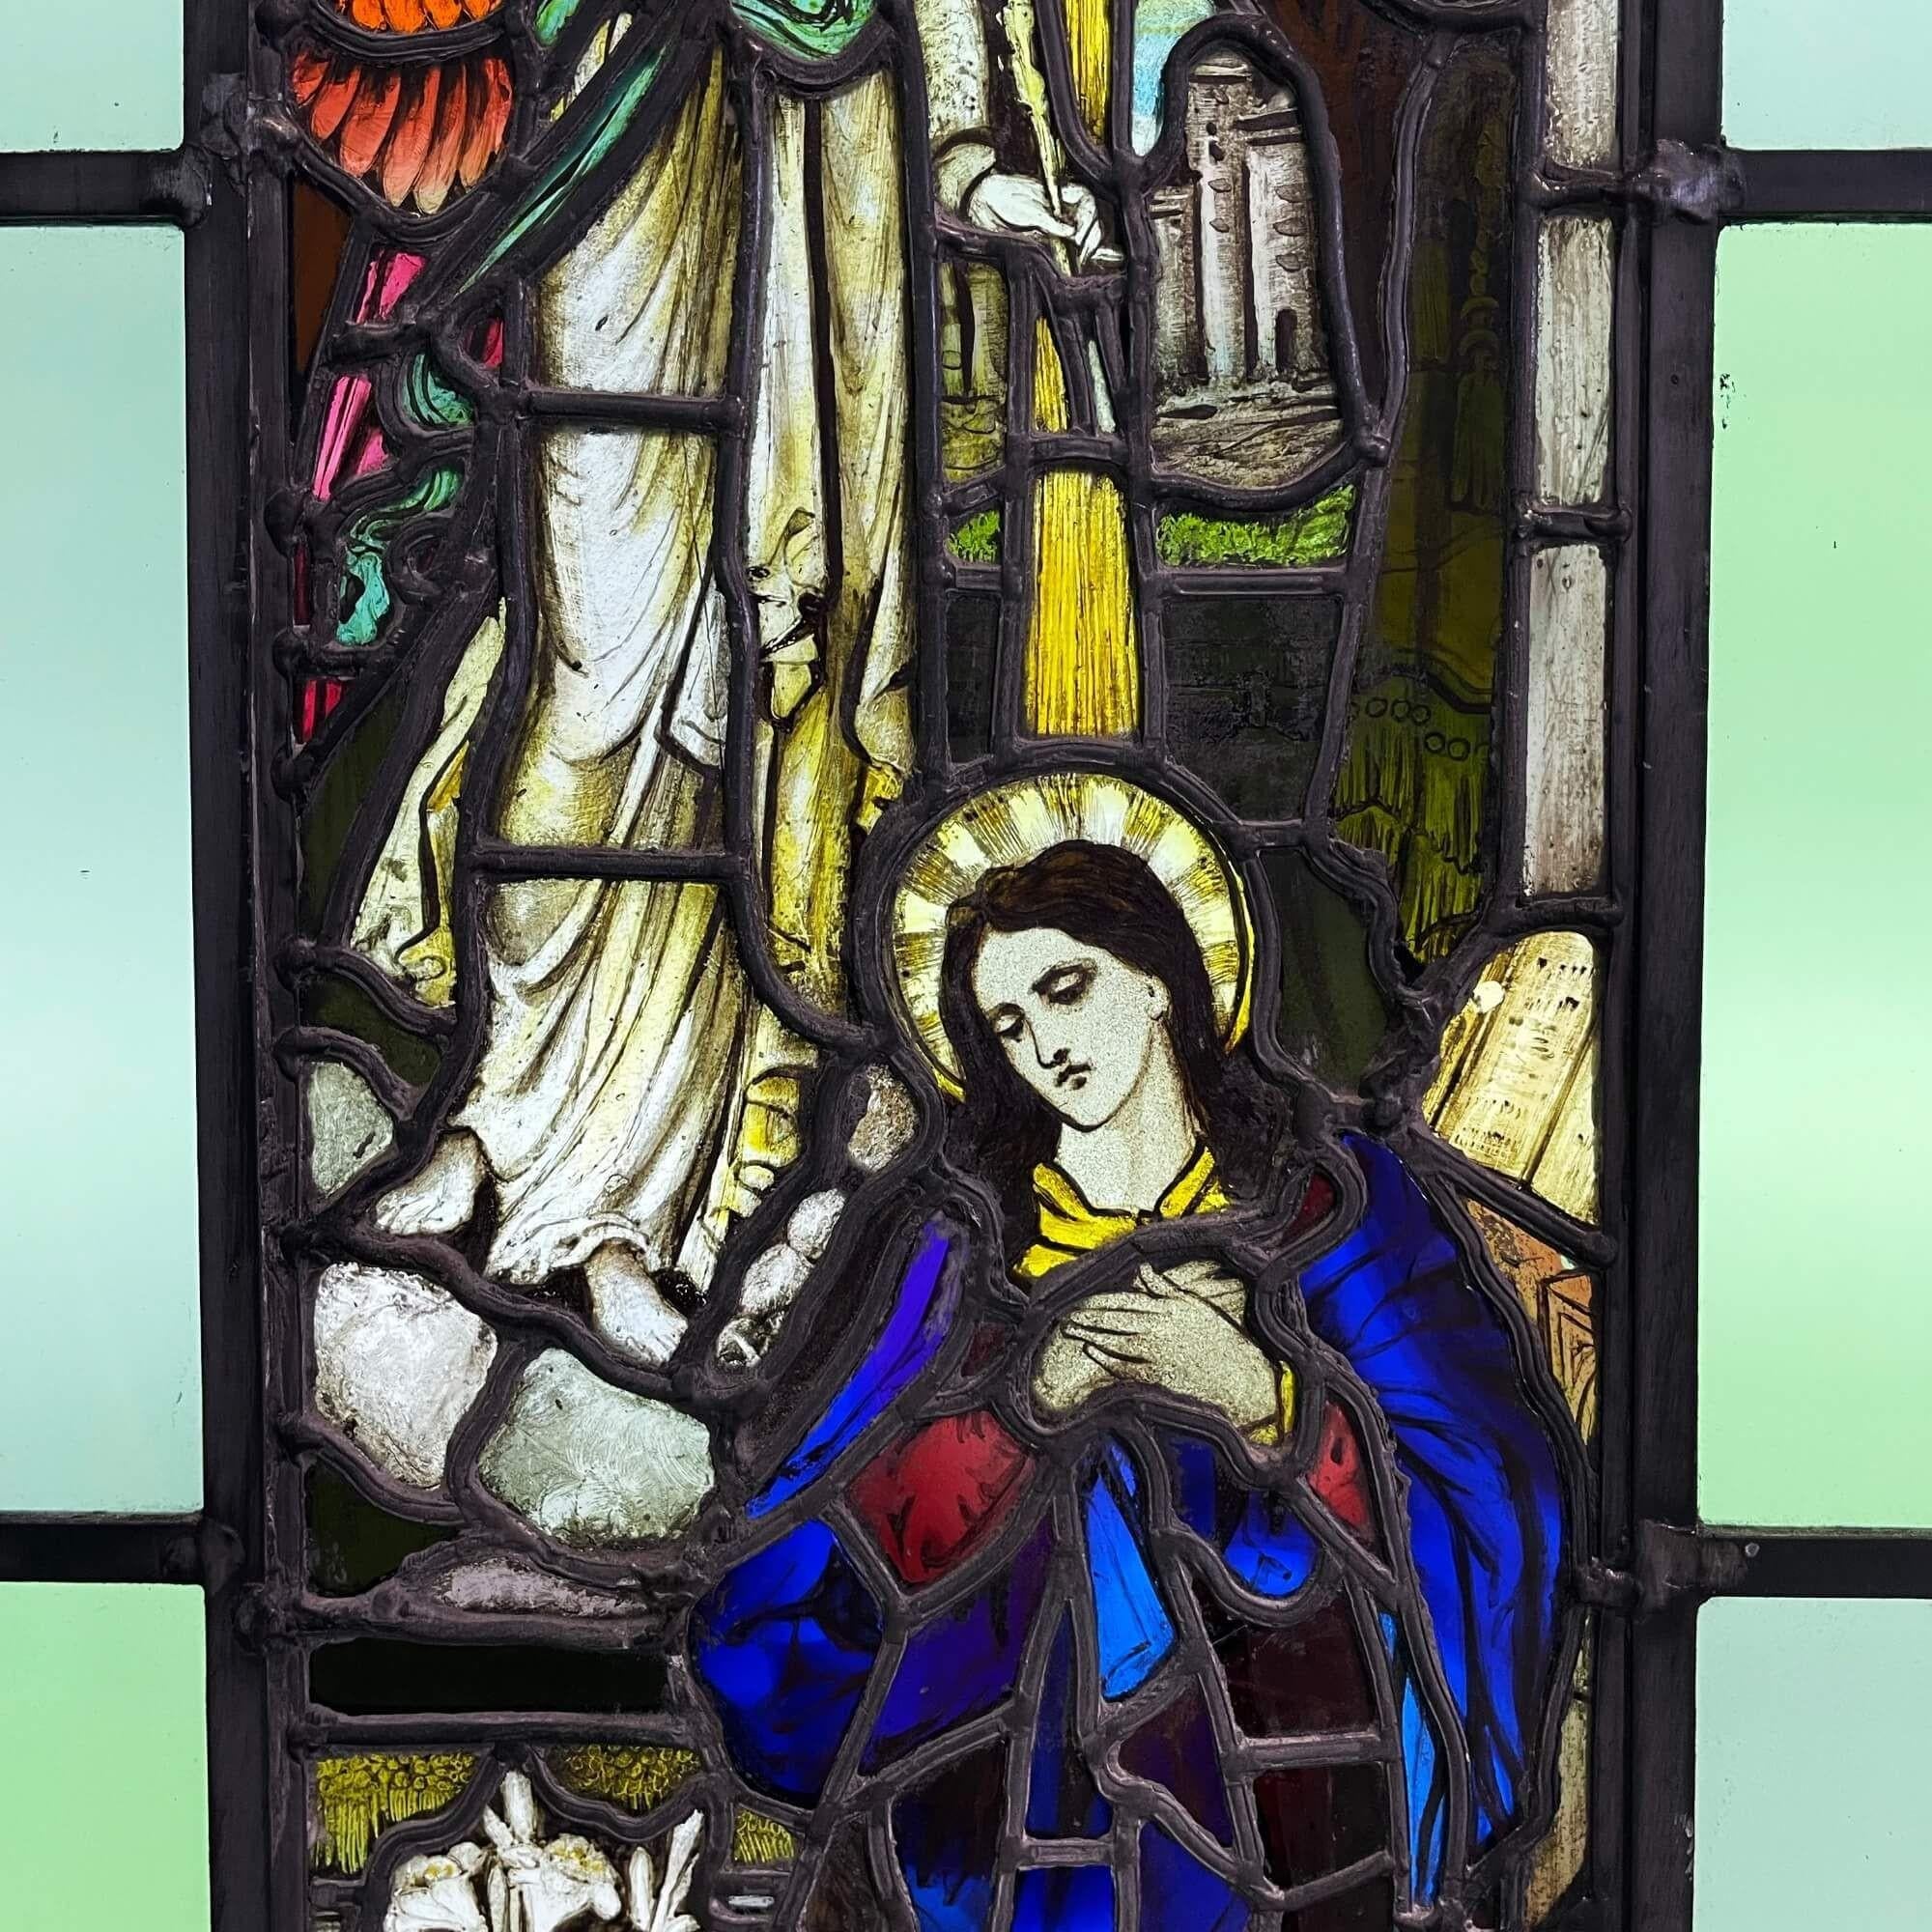 A mid 19th century religious stained glass window depicting the Annunciation, circa 1850. This vibrant stained glass window centres around a detailed panel illustrating the archangel Gabriel and Mary, dressed in blue. This is bordered by simpler